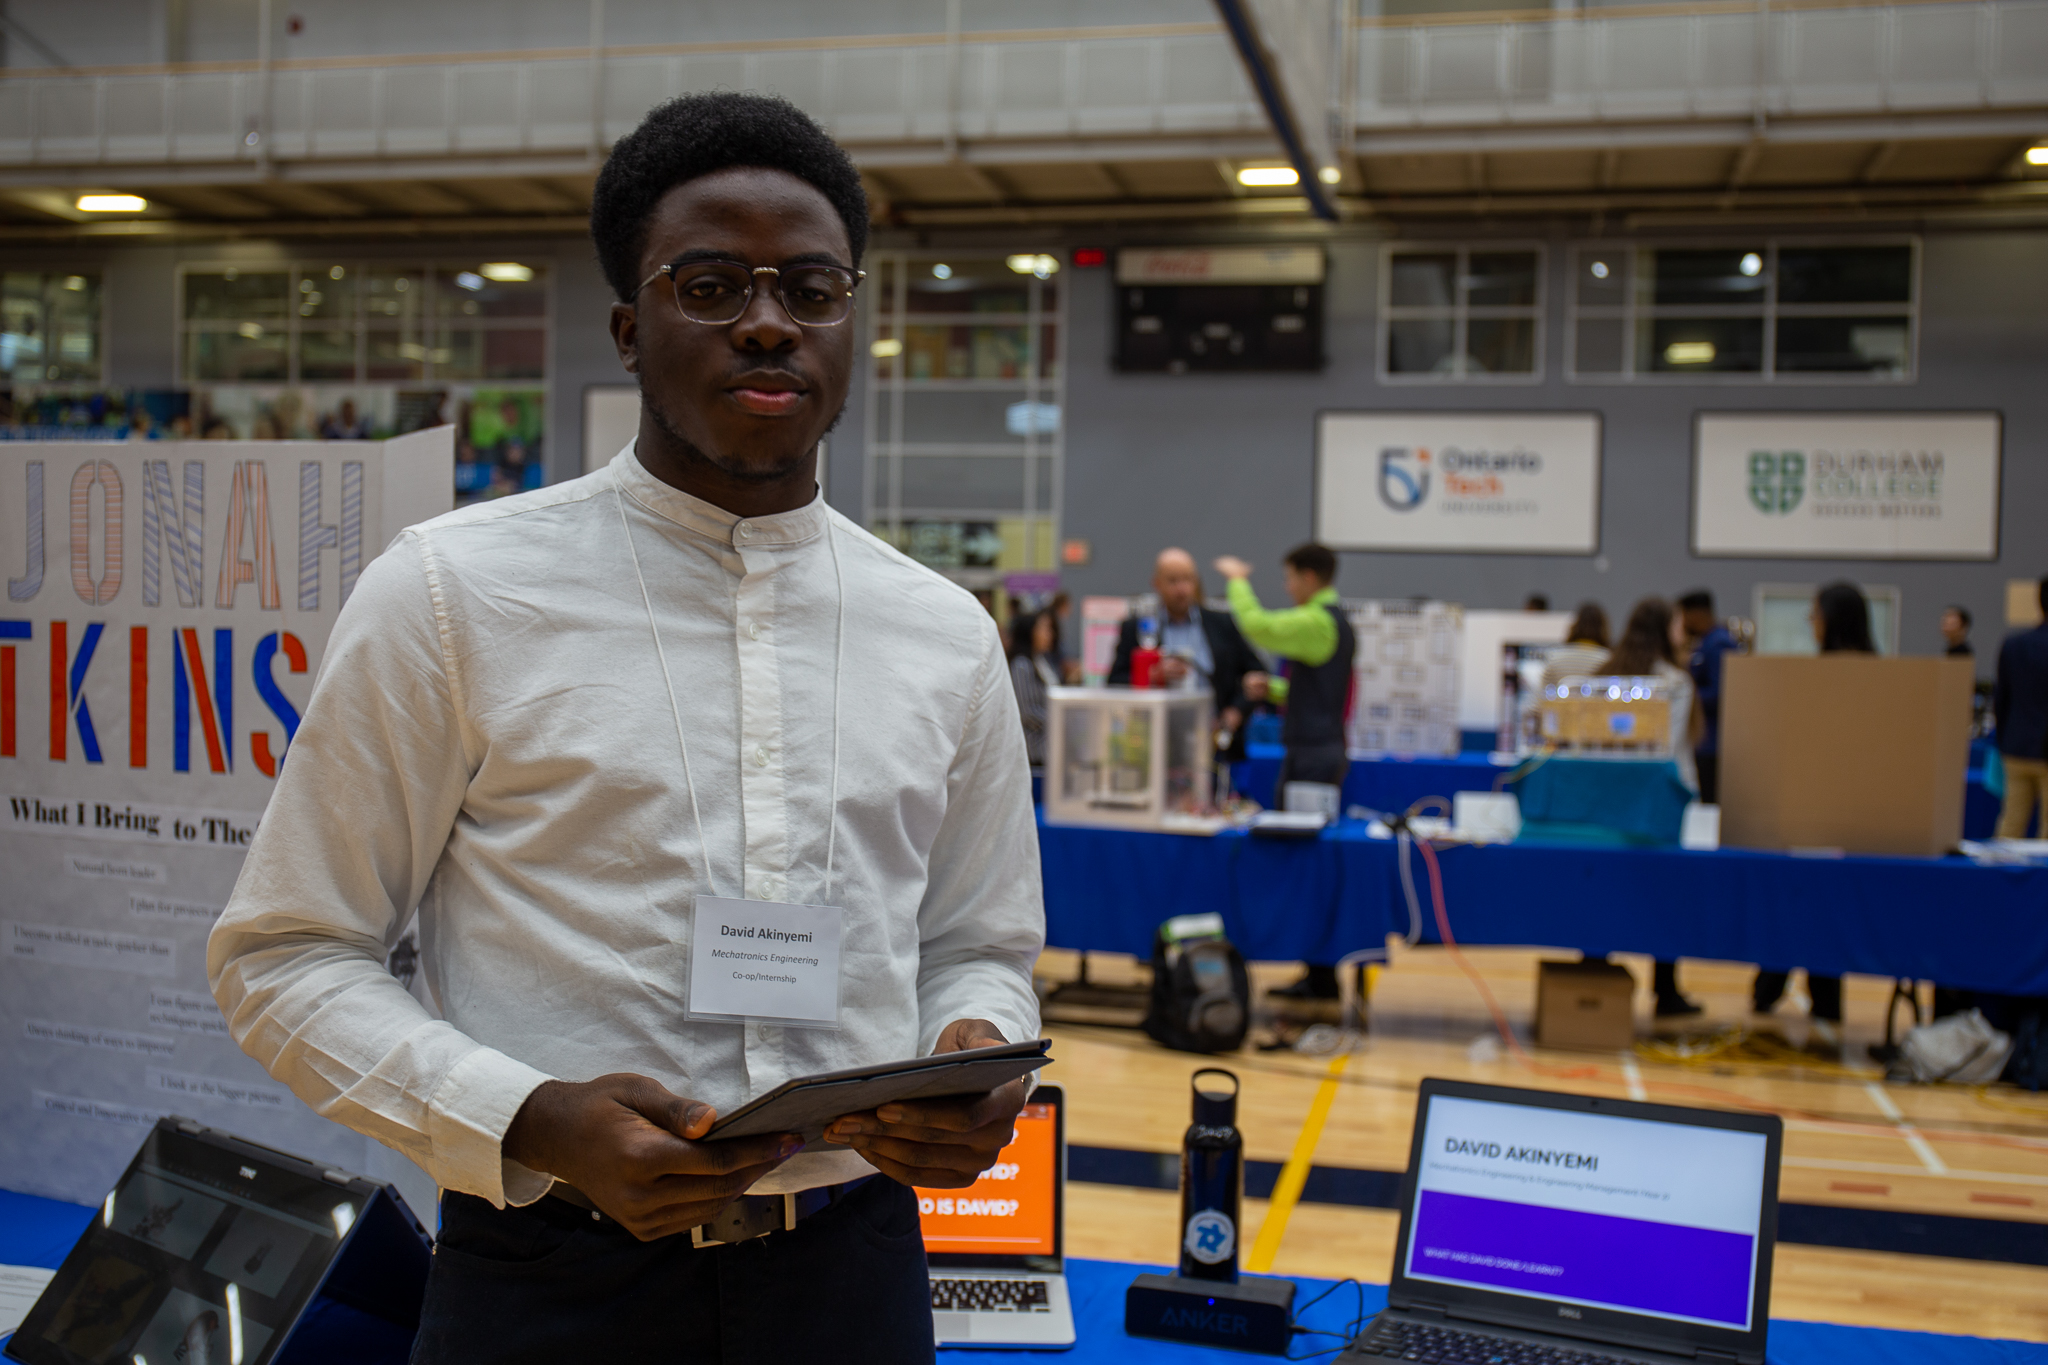 Student standing in front of a booth displaying work